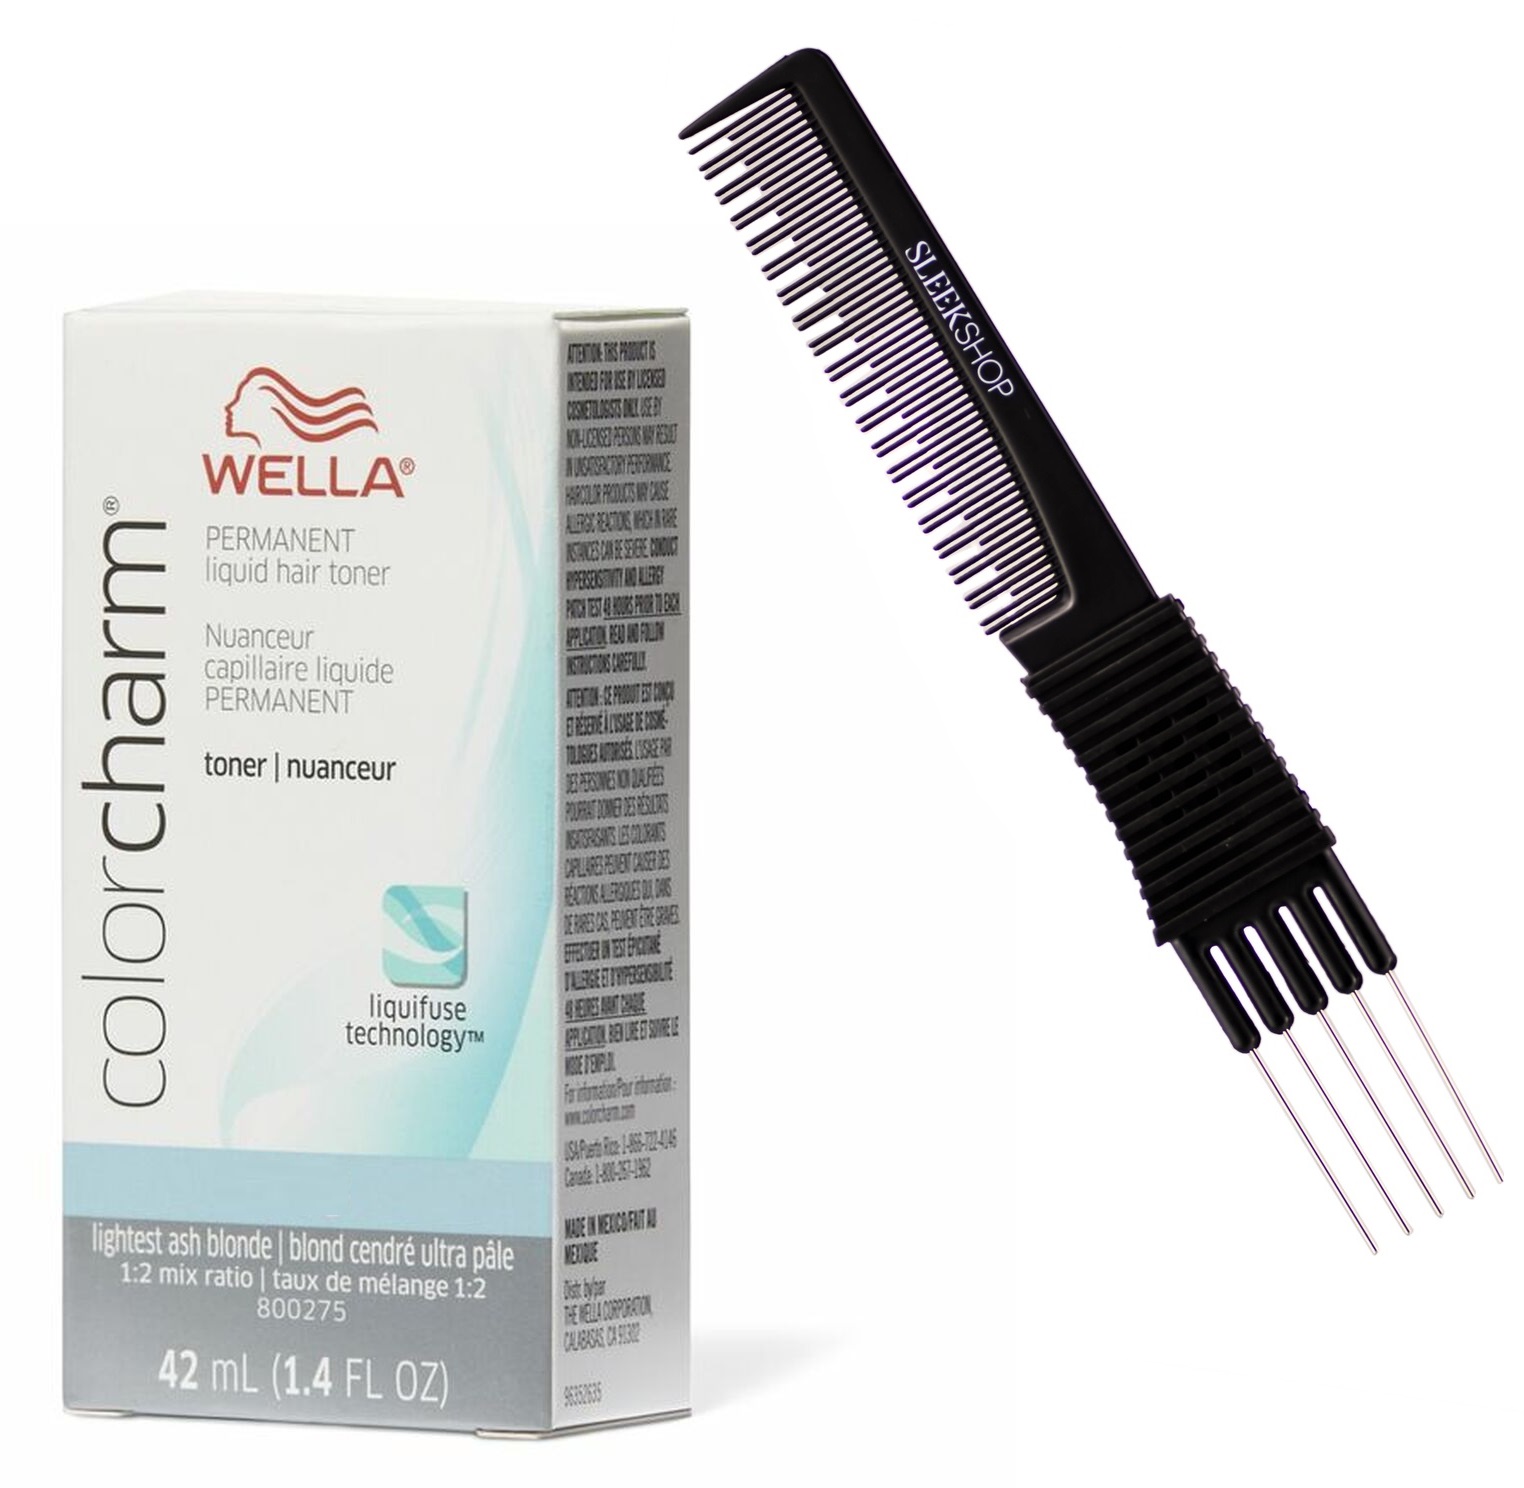 T-18 - Lightest Ash Blonde T18 , Wella Color Charm LIQUID Permanent Hair Toner, Toning Hair Color Dye Haircolor Hair - Pack of 2 w/ Sleek Teasing Comb - image 1 of 1